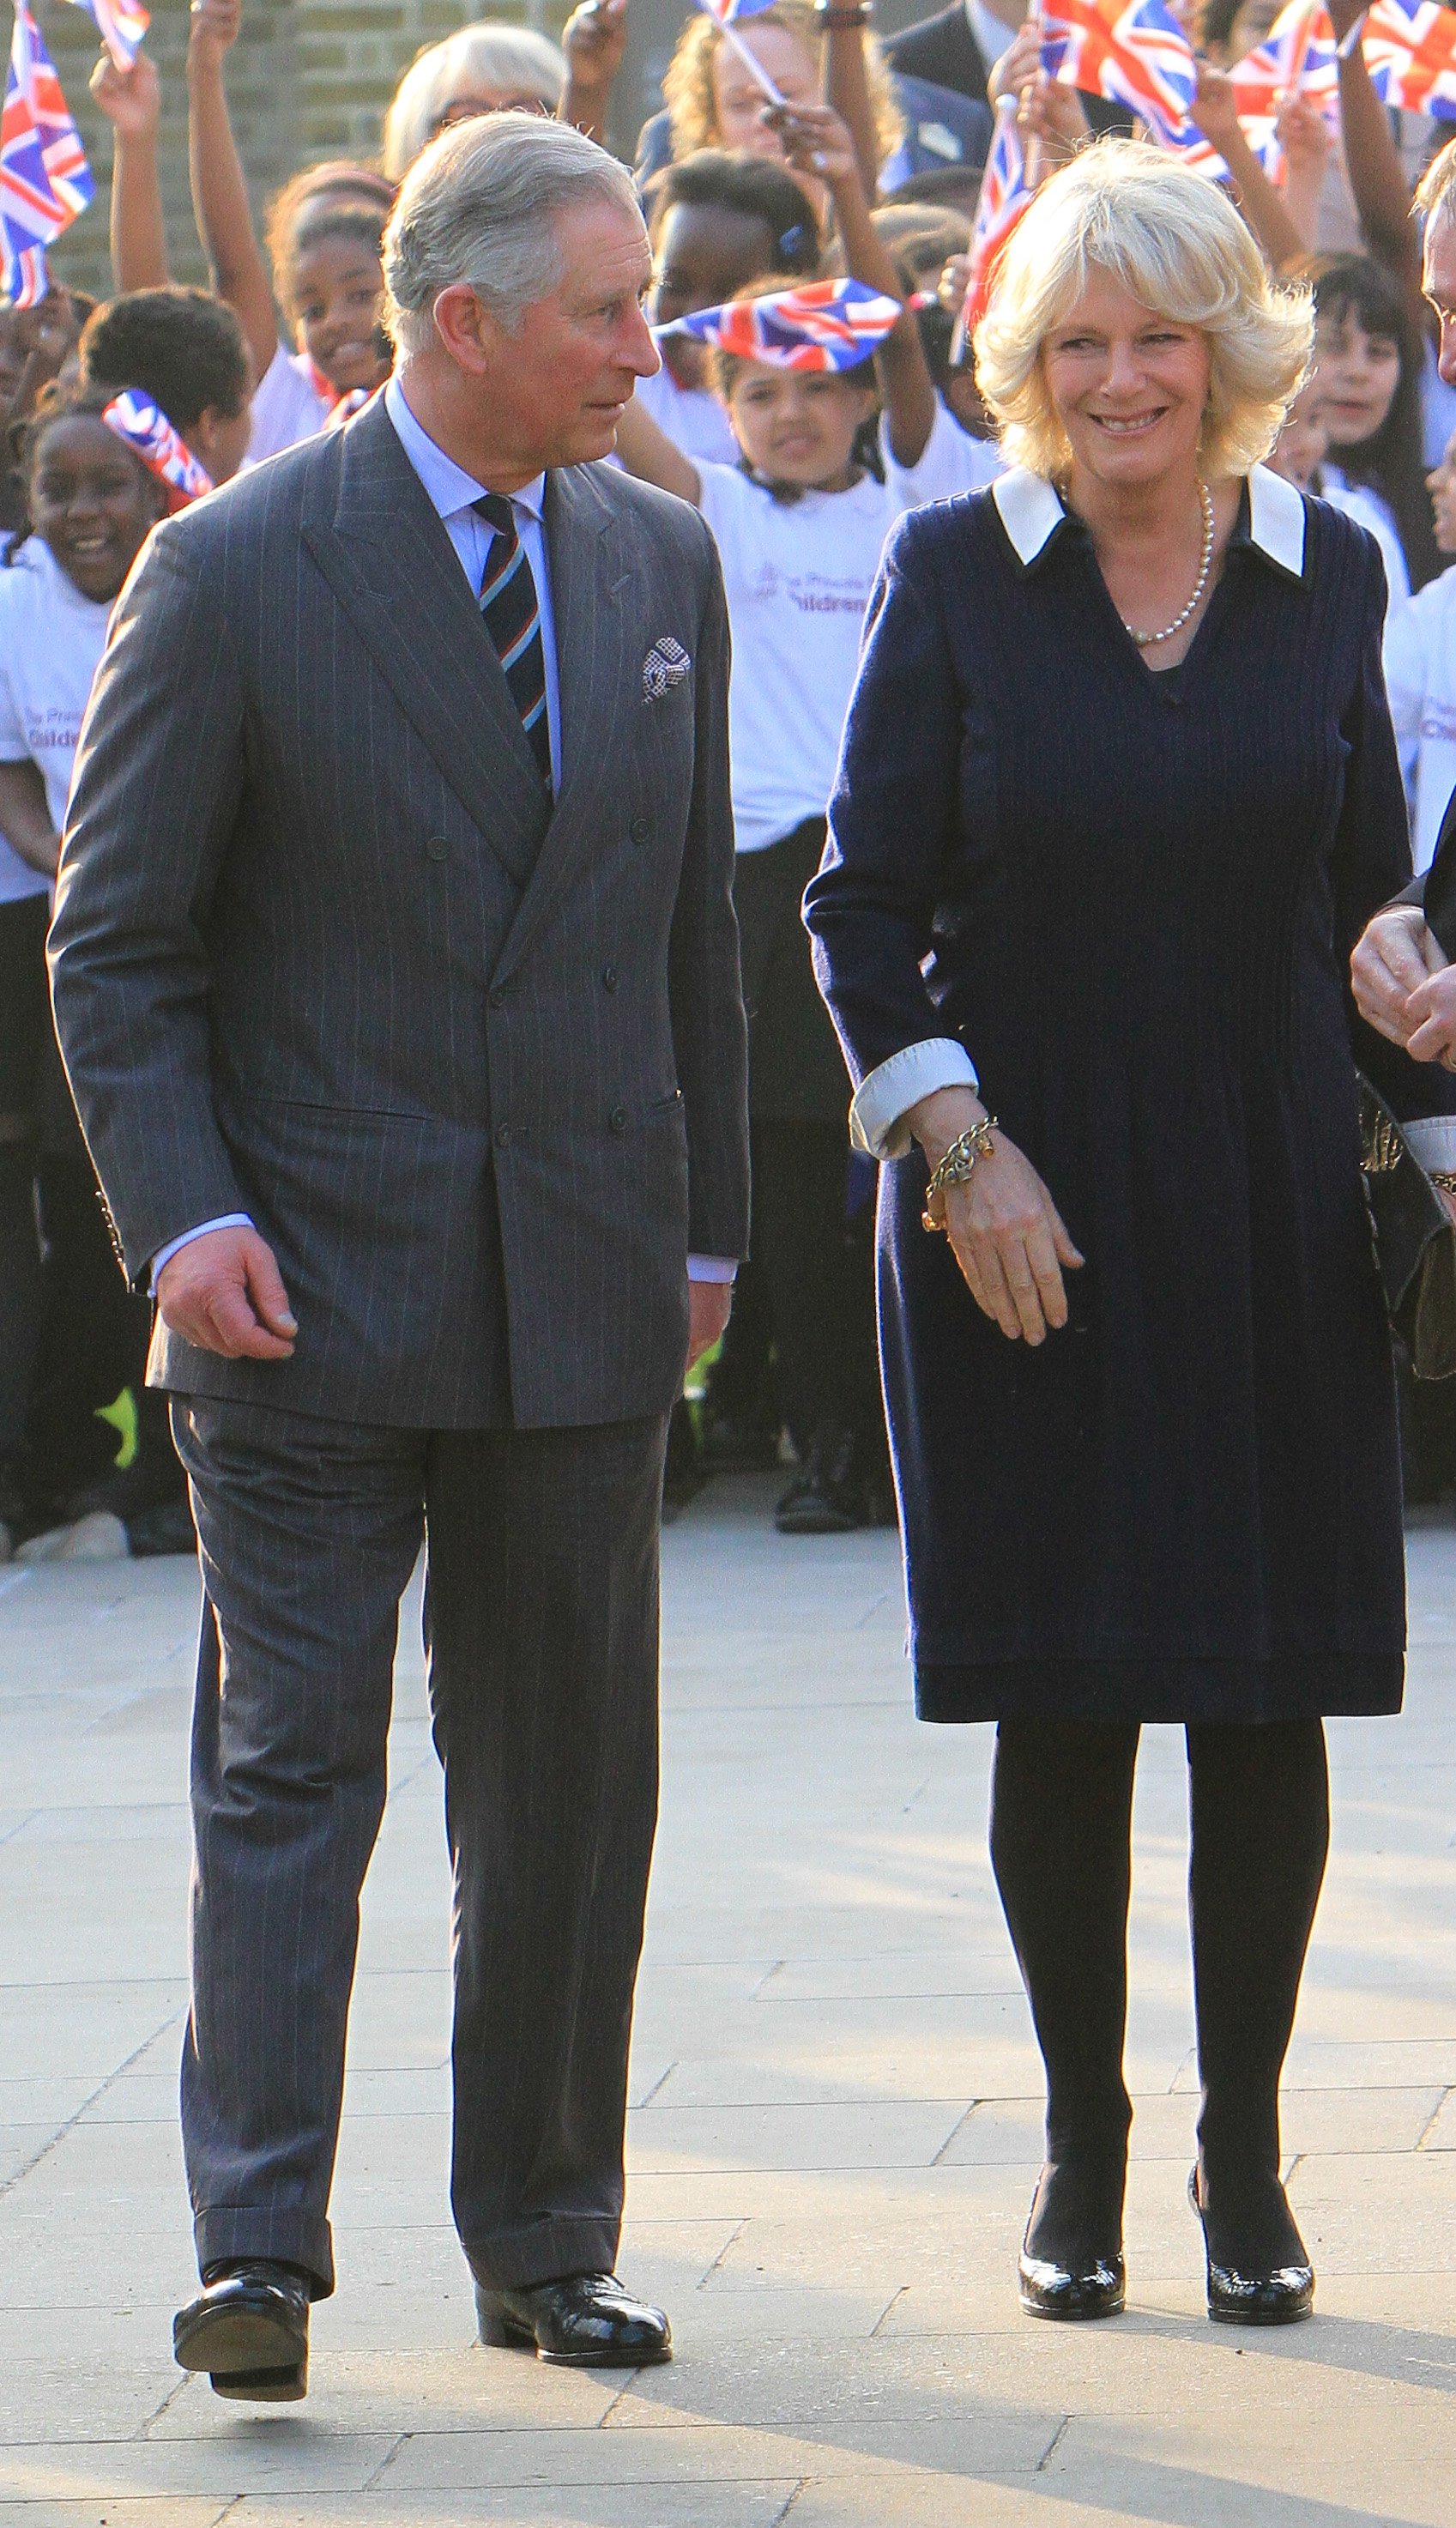 Prince Charles (Now King) and Camila visit The Prince's Foundation For Children And The Arts at Dulwich Picture Gallery on March 15, 2012 in London, England | Source: Getty Images